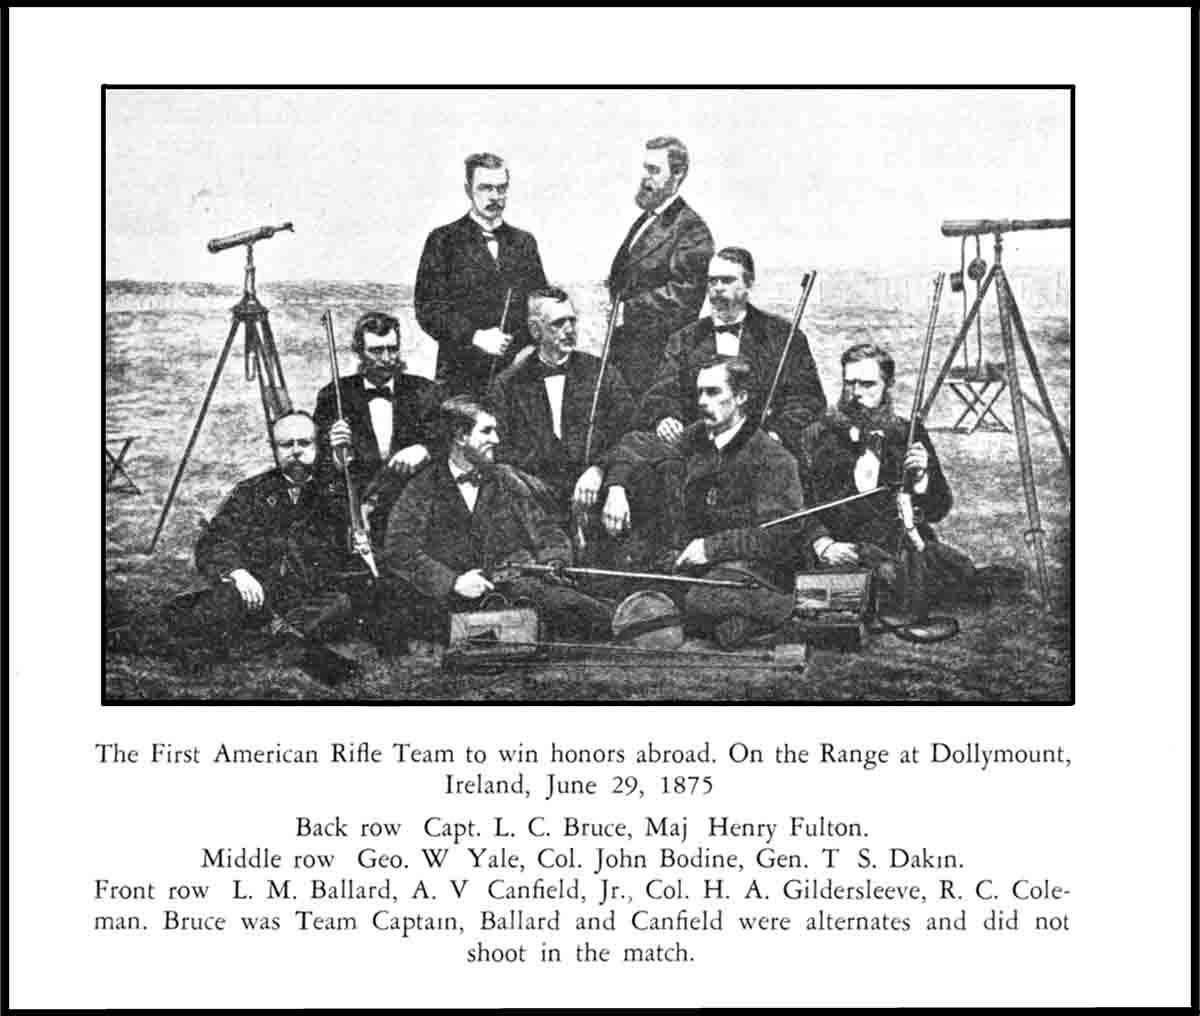 The American rifle team at Dollymount, Ireland, June 29, 1875. From The Muzzleloading Caplock Rifle by Roberts.